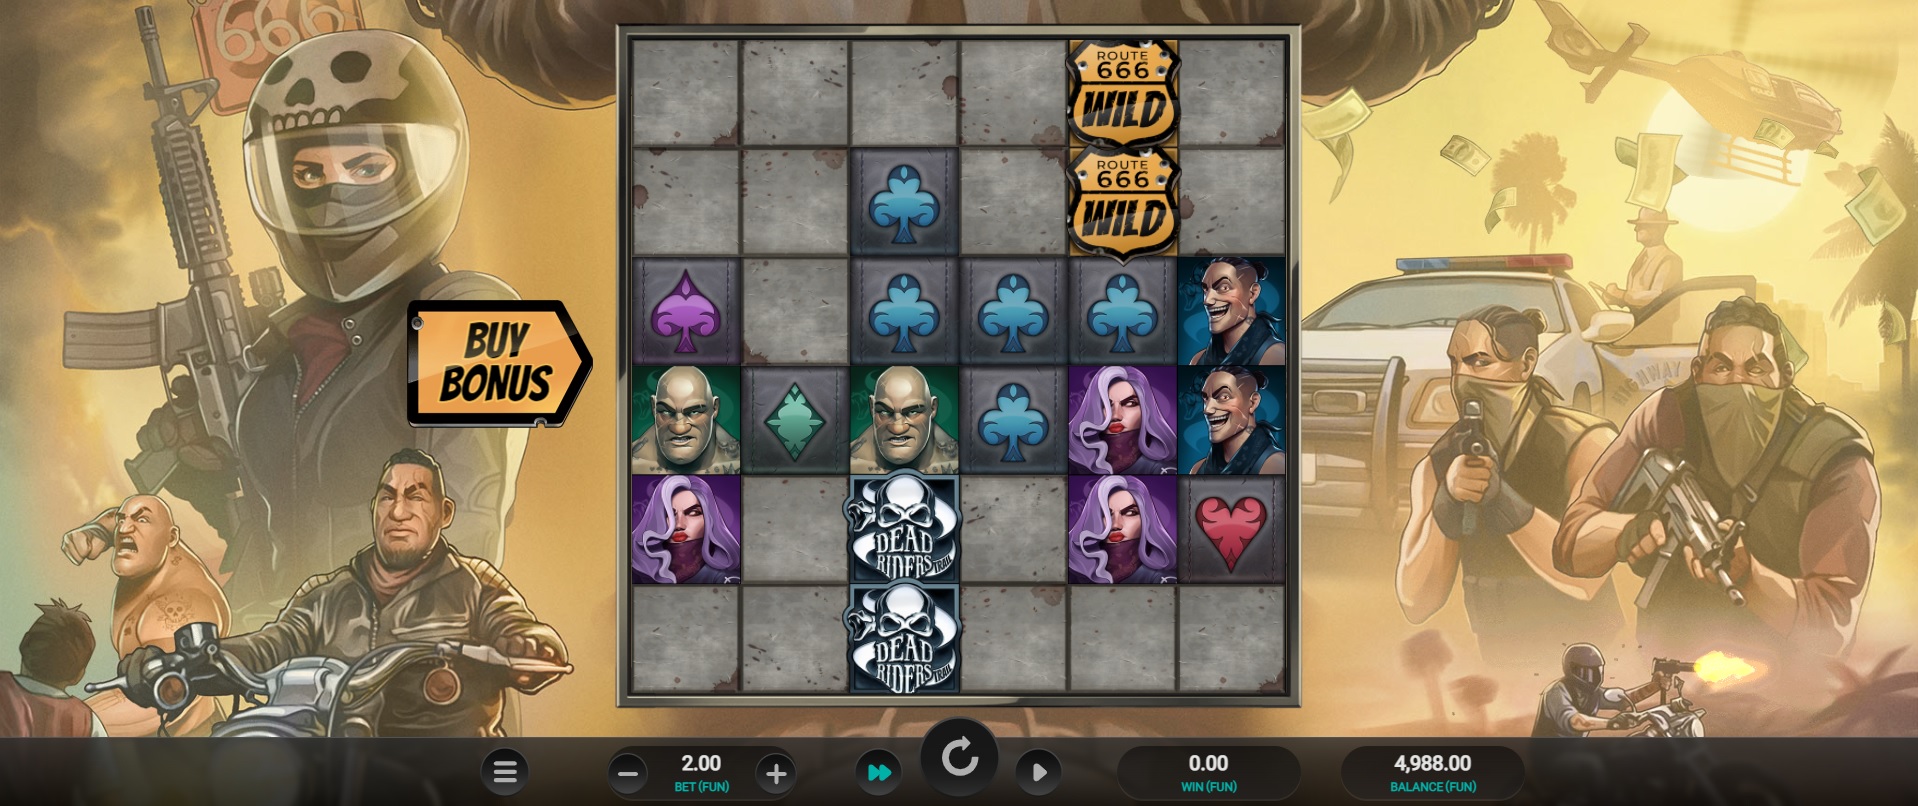 Dead Riders Trail, Base slot game